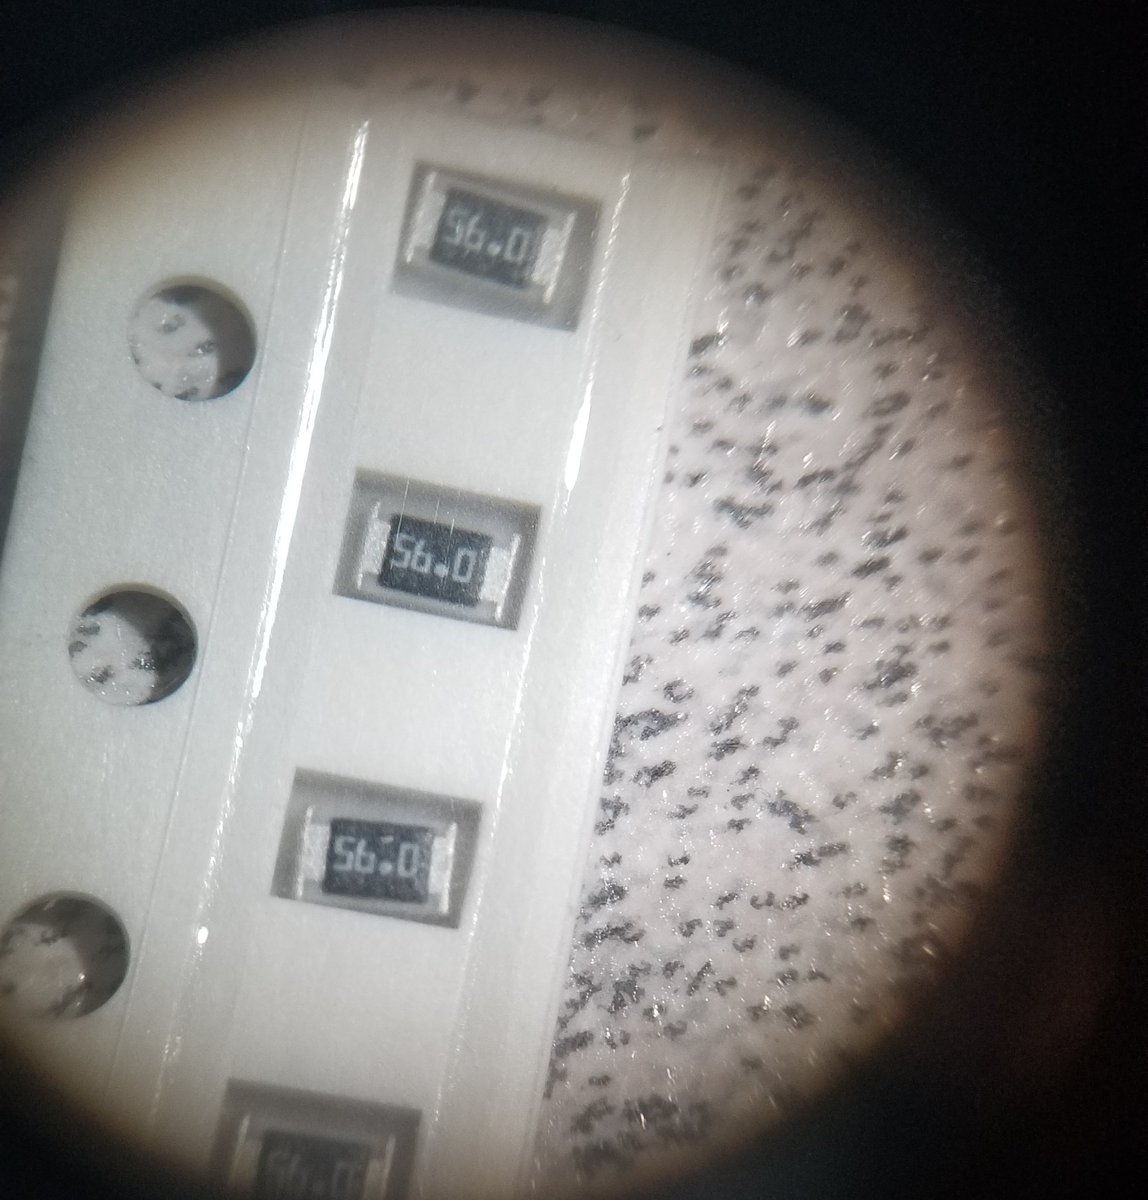 You know you're having a good day when you have the microscope out so you can sort some smd resistors that got mixed up